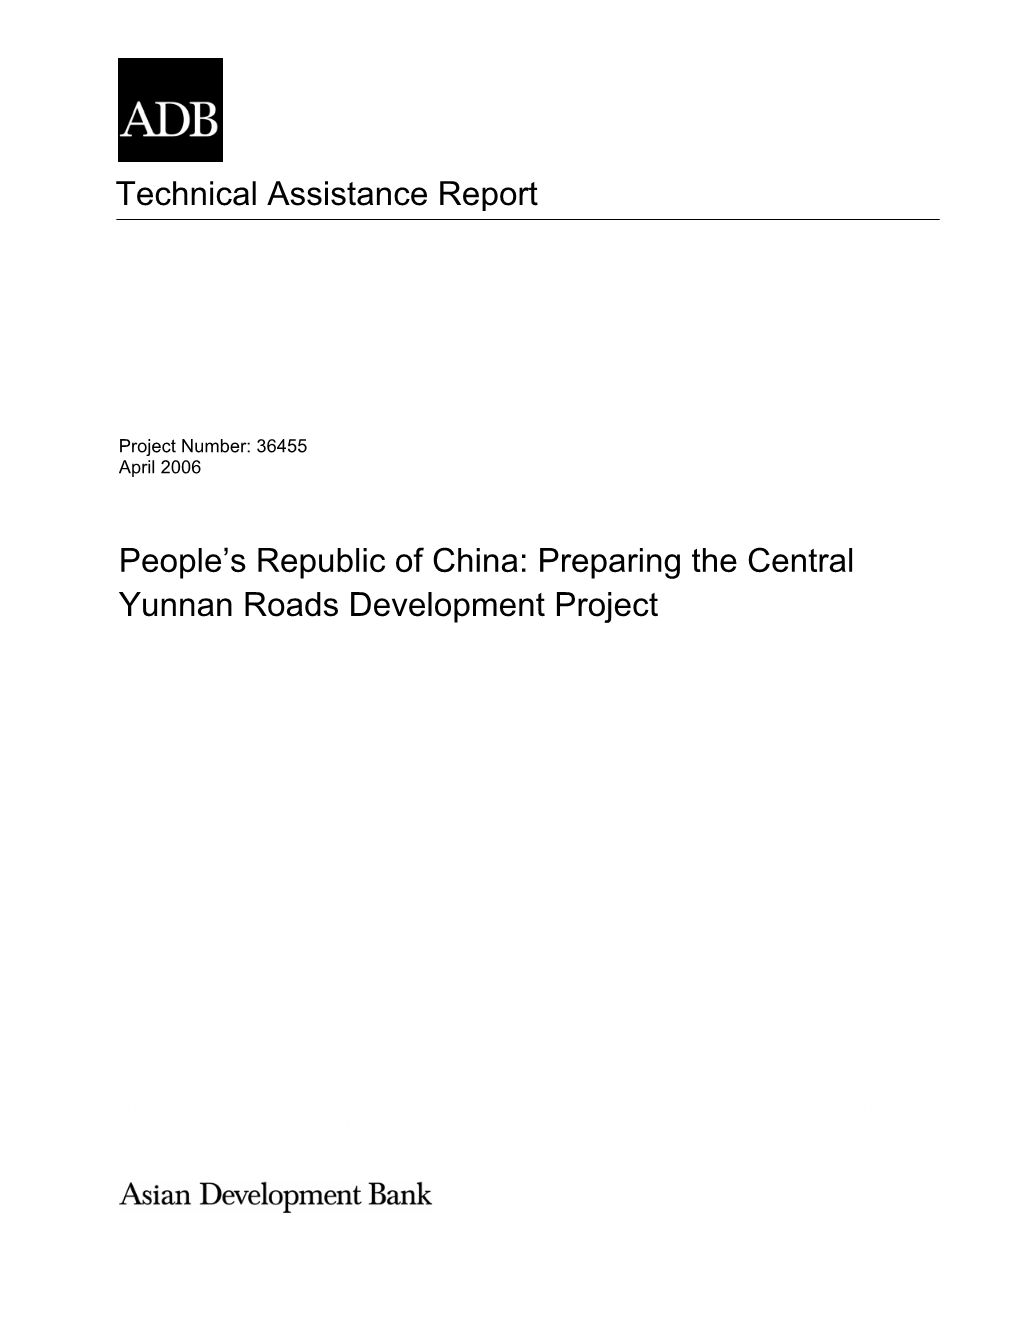 Technical Assistance Report People's Republic of China: Preparing The